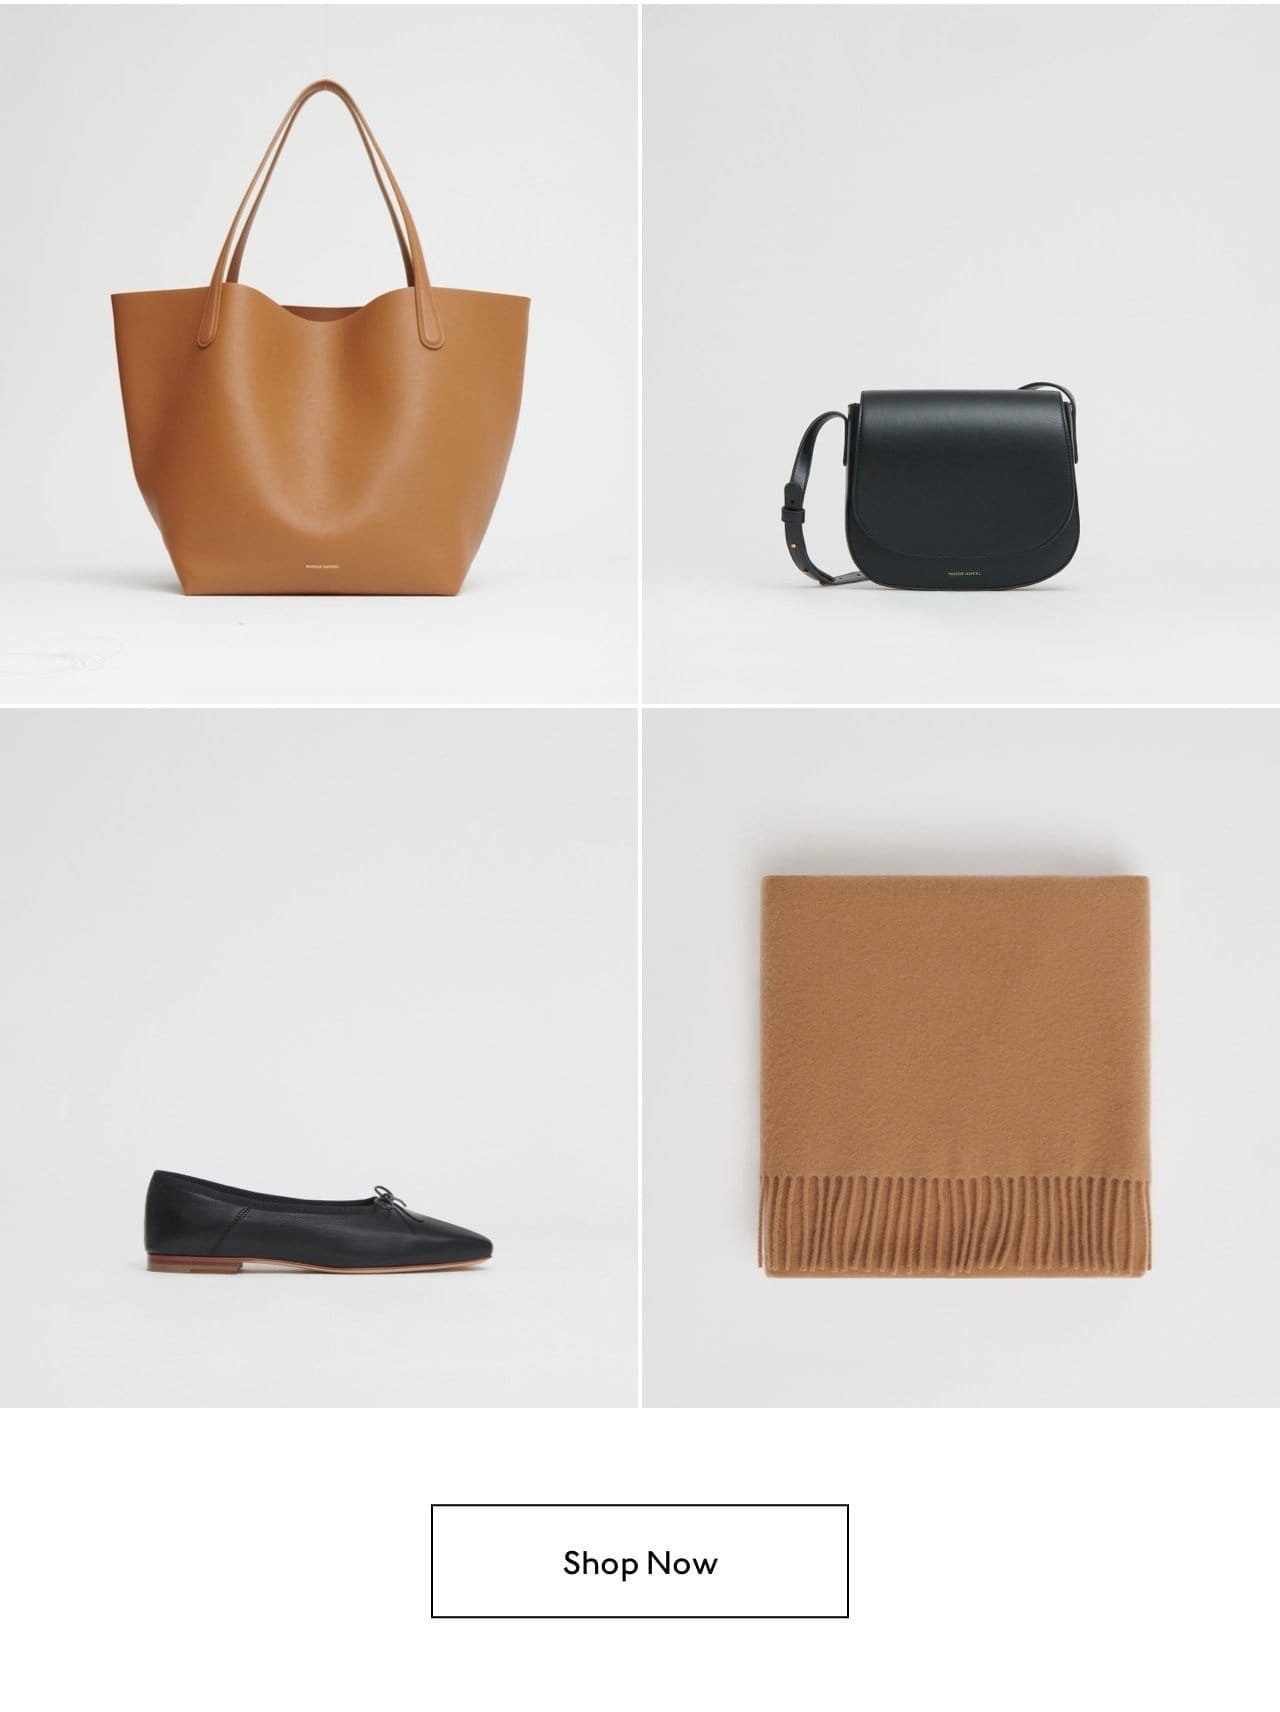 Shop our Everyday Soft Tote in Caramel, our Mini Crossbody in Black Vegetable Tanned Leather, our Dream Ballerina in Black, and our Classic Wool Wrap Scarf in Camel.